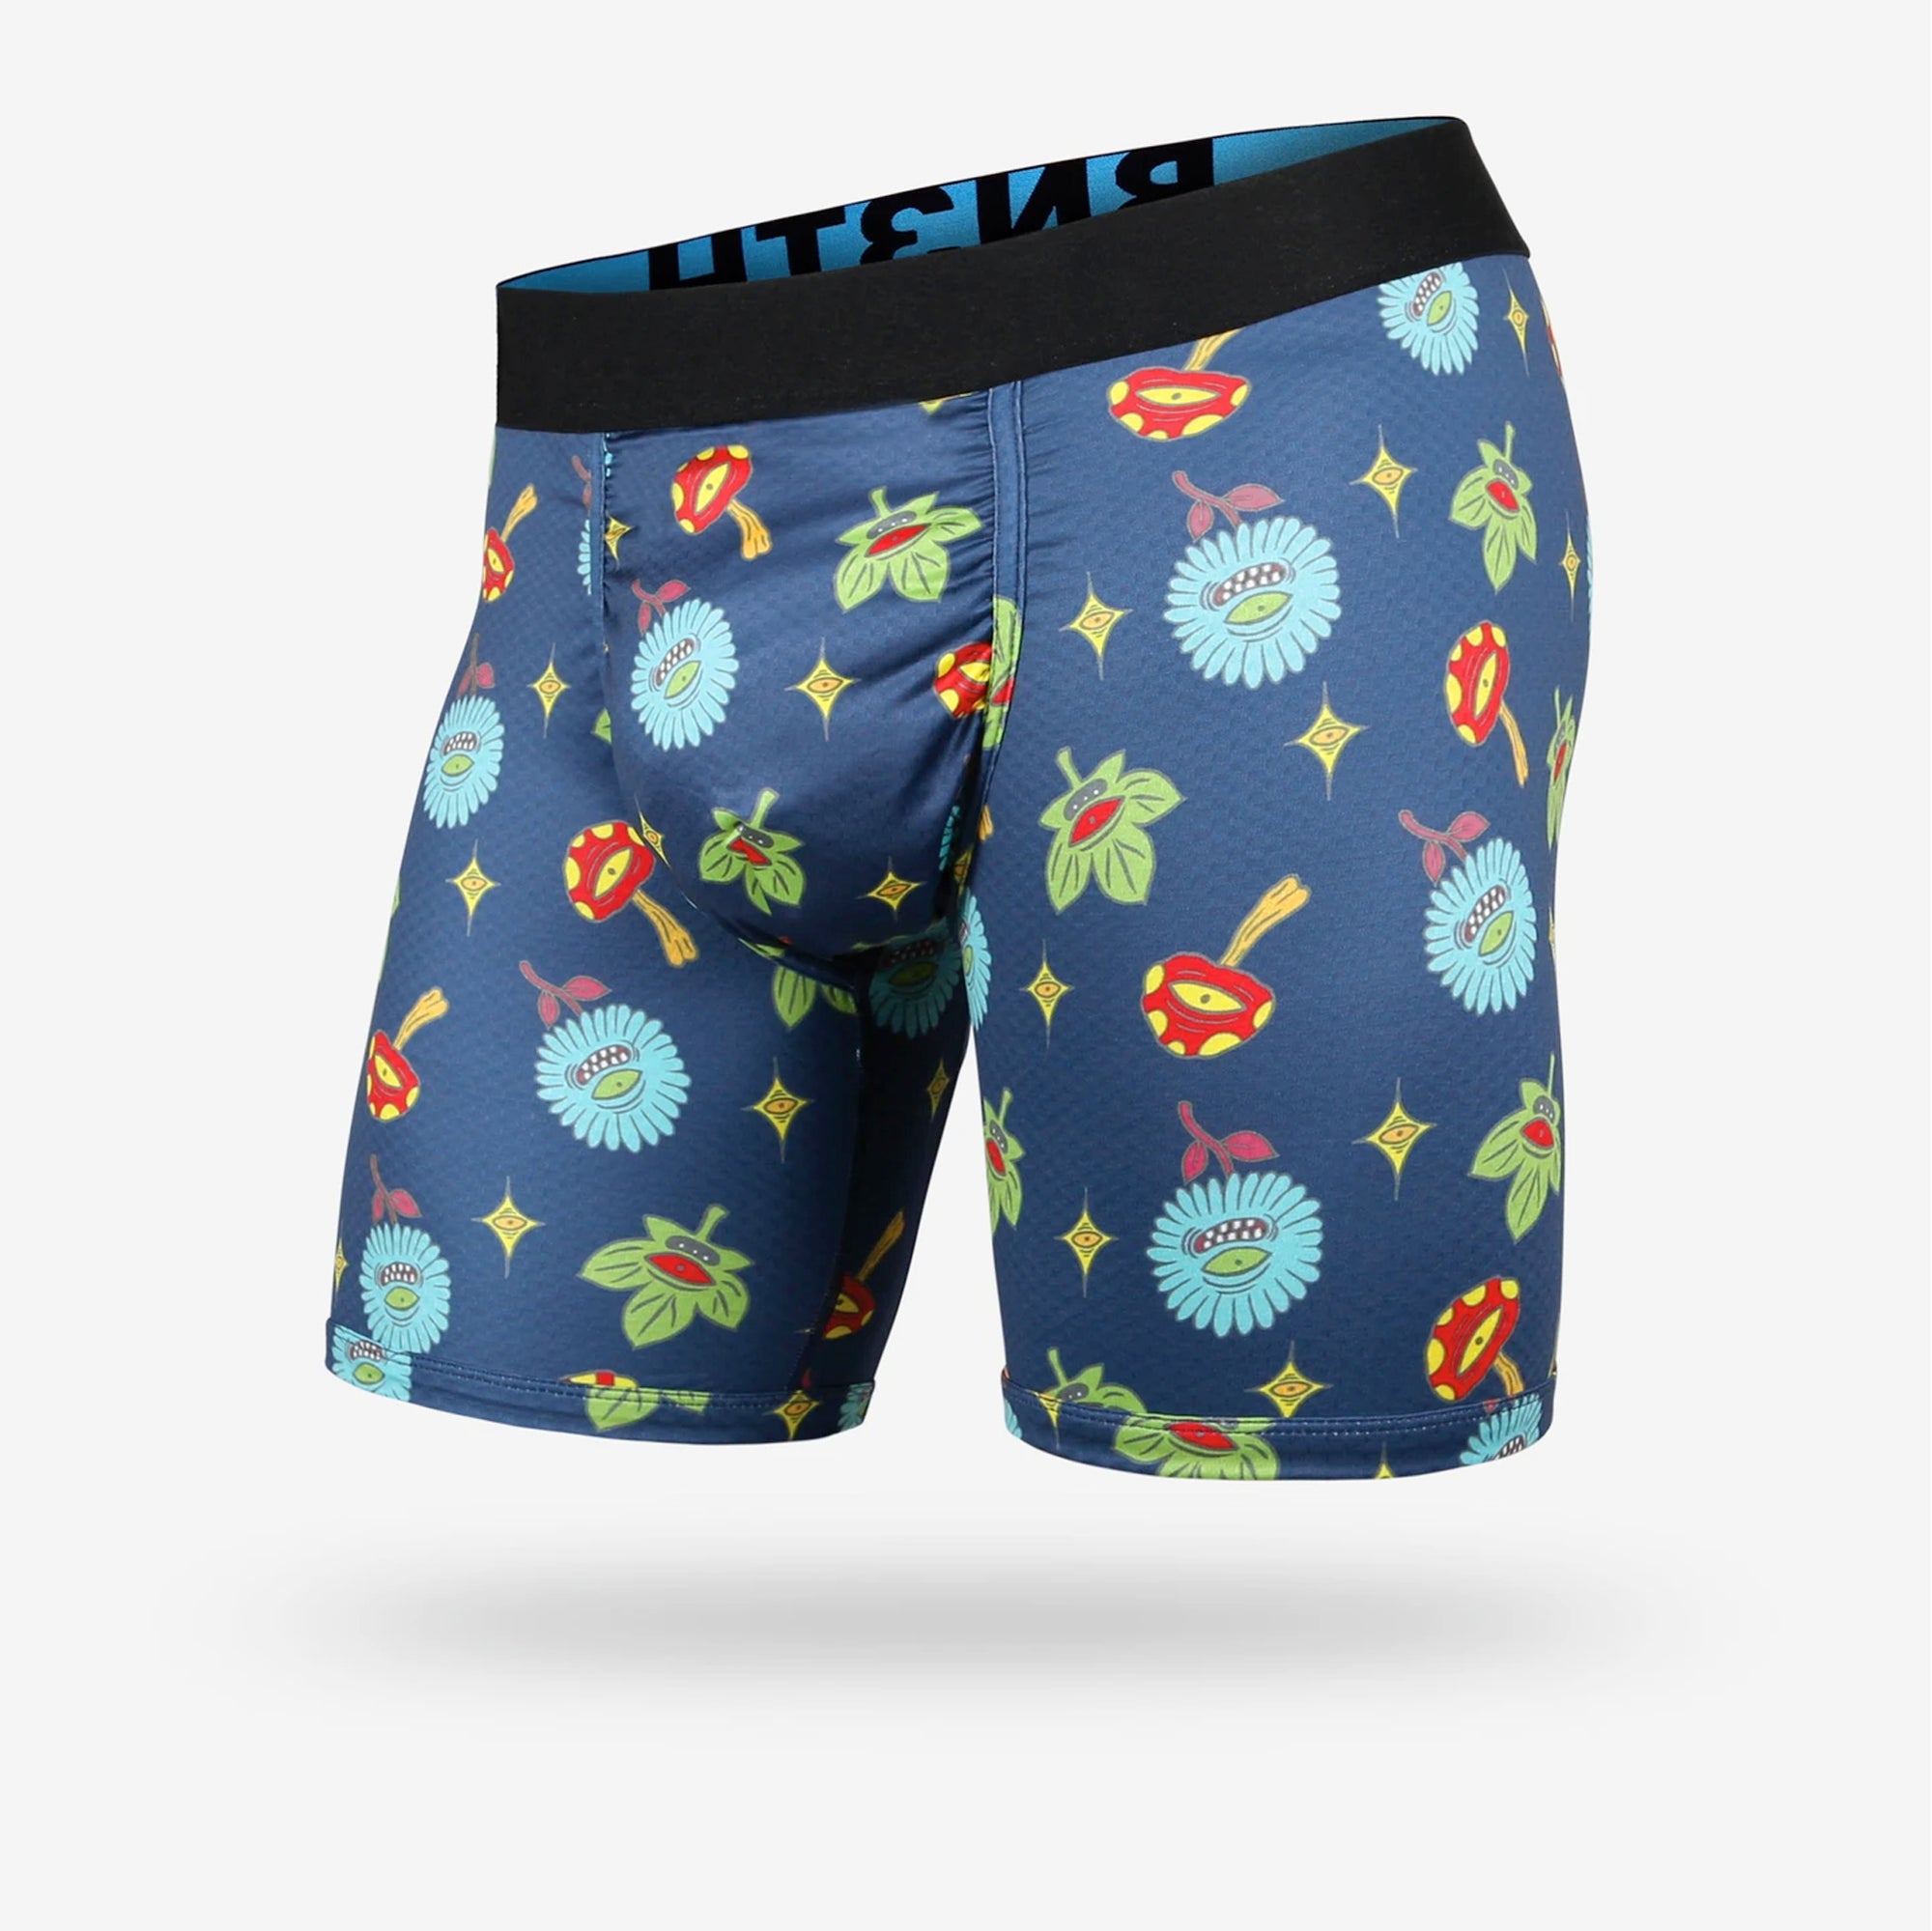 BN3TH Classic Men's Boxer Briefs - Neon Christmas - Surf Station Store